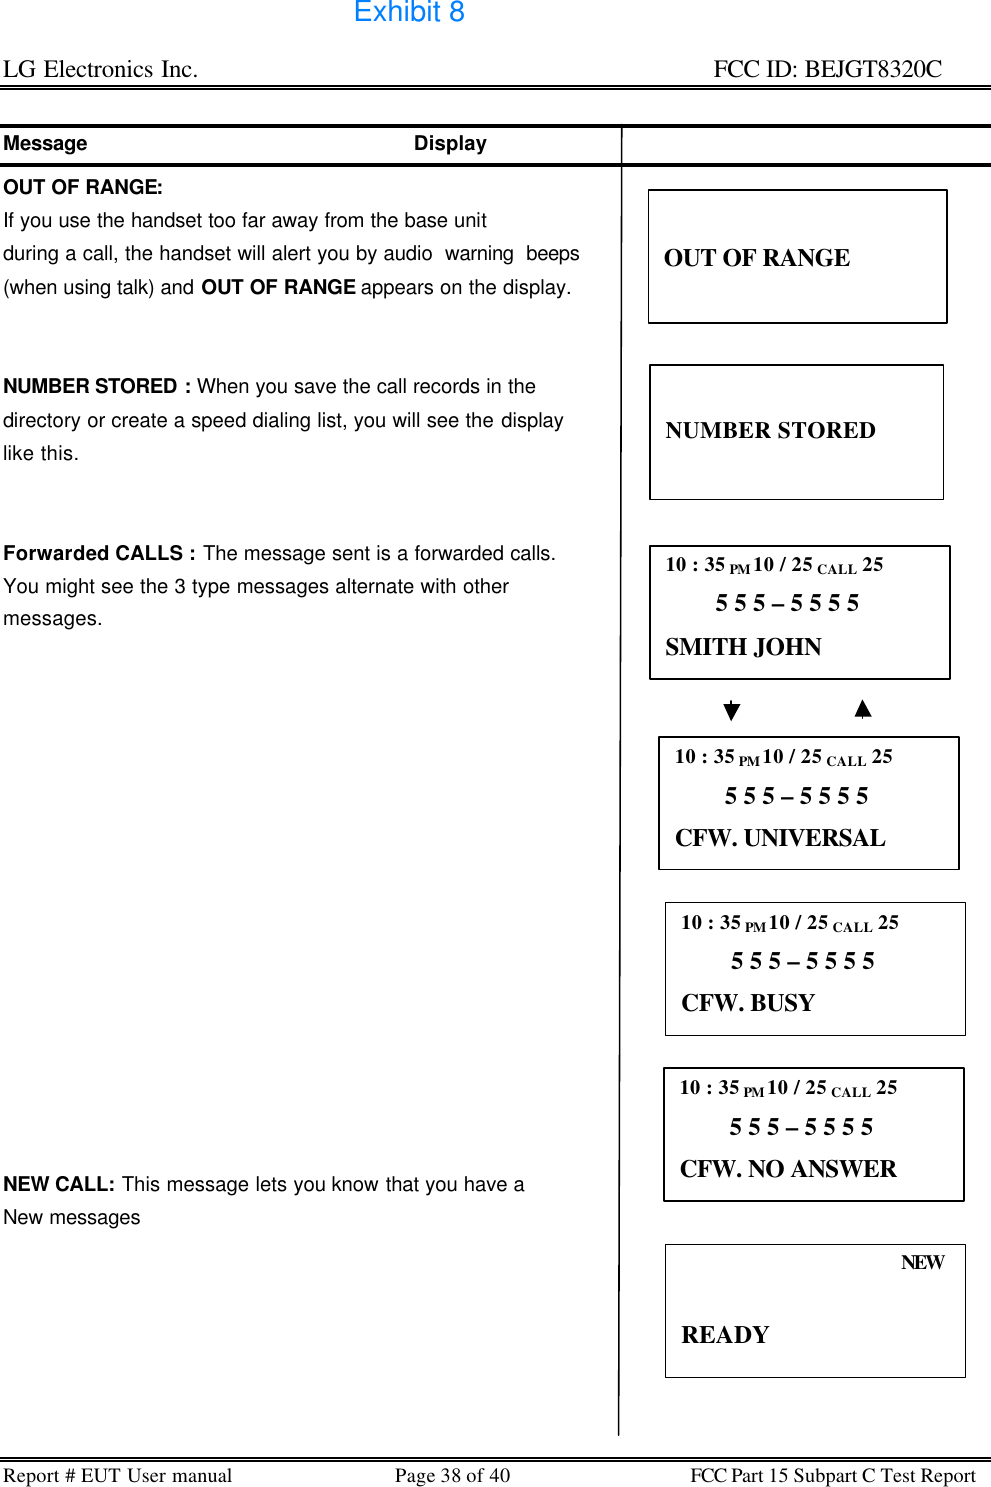 LG Electronics Inc.                                                                                                   FCC ID: BEJGT8320C Report # EUT User manual Page 38 of 40 FCC Part 15 Subpart C Test Report   Message                                                    Display OUT OF RANGE:  If you use the handset too far away from the base unit  during a call, the handset will alert you by audio  warning  beeps (when using talk) and OUT OF RANGE appears on the display.   NUMBER STORED : When you save the call records in the  directory or create a speed dialing list, you will see the display like this.   Forwarded CALLS : The message sent is a forwarded calls. You might see the 3 type messages alternate with other messages.                 NEW CALL: This message lets you know that you have a New messages    OUT OF RANGE 10 : 35 PM 10 / 25 CALL 25         5 5 5 – 5 5 5 5 SMITH JOHN 10 : 35 PM 10 / 25 CALL 25         5 5 5 – 5 5 5 5 CFW. UNIVERSAL 10 : 35 PM 10 / 25 CALL 25         5 5 5 – 5 5 5 5 CFW. BUSY 10 : 35 PM 10 / 25 CALL 25         5 5 5 – 5 5 5 5 CFW. NO ANSWER NEW  READY   NUMBER STORED Exhibit 8